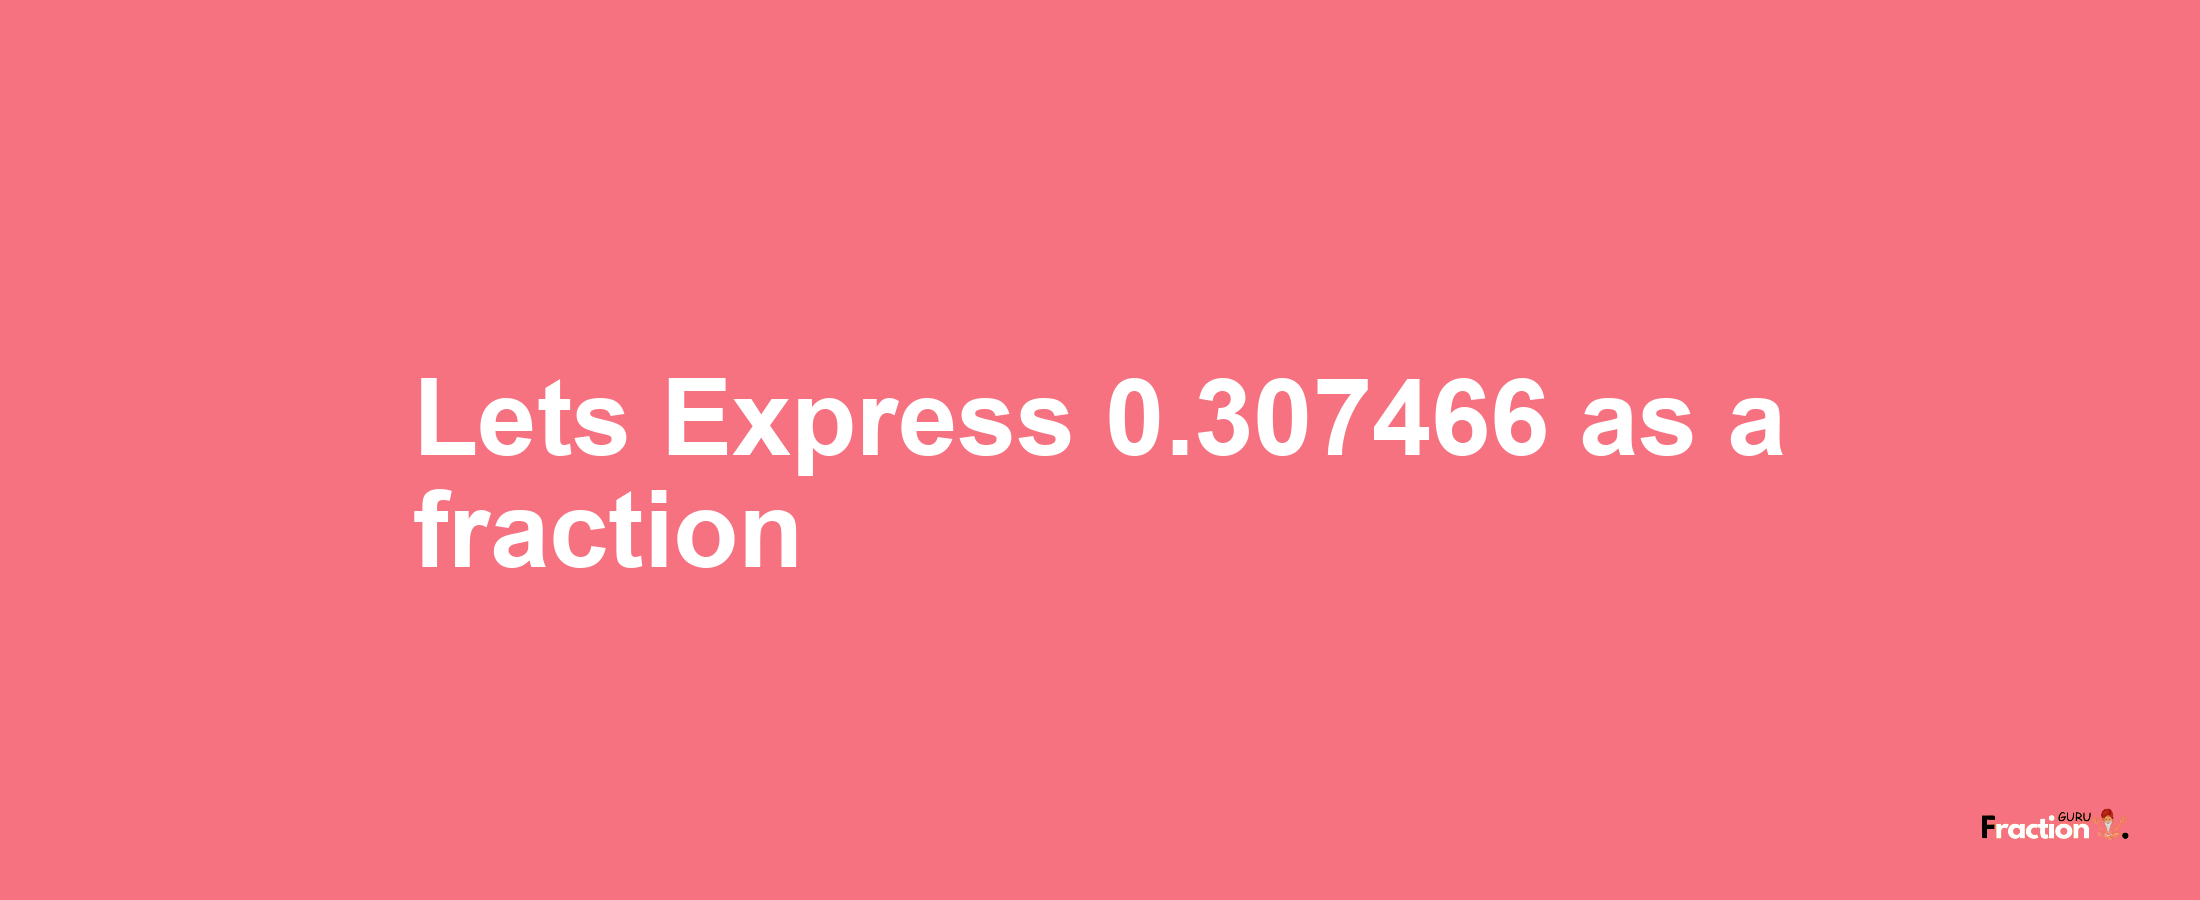 Lets Express 0.307466 as afraction